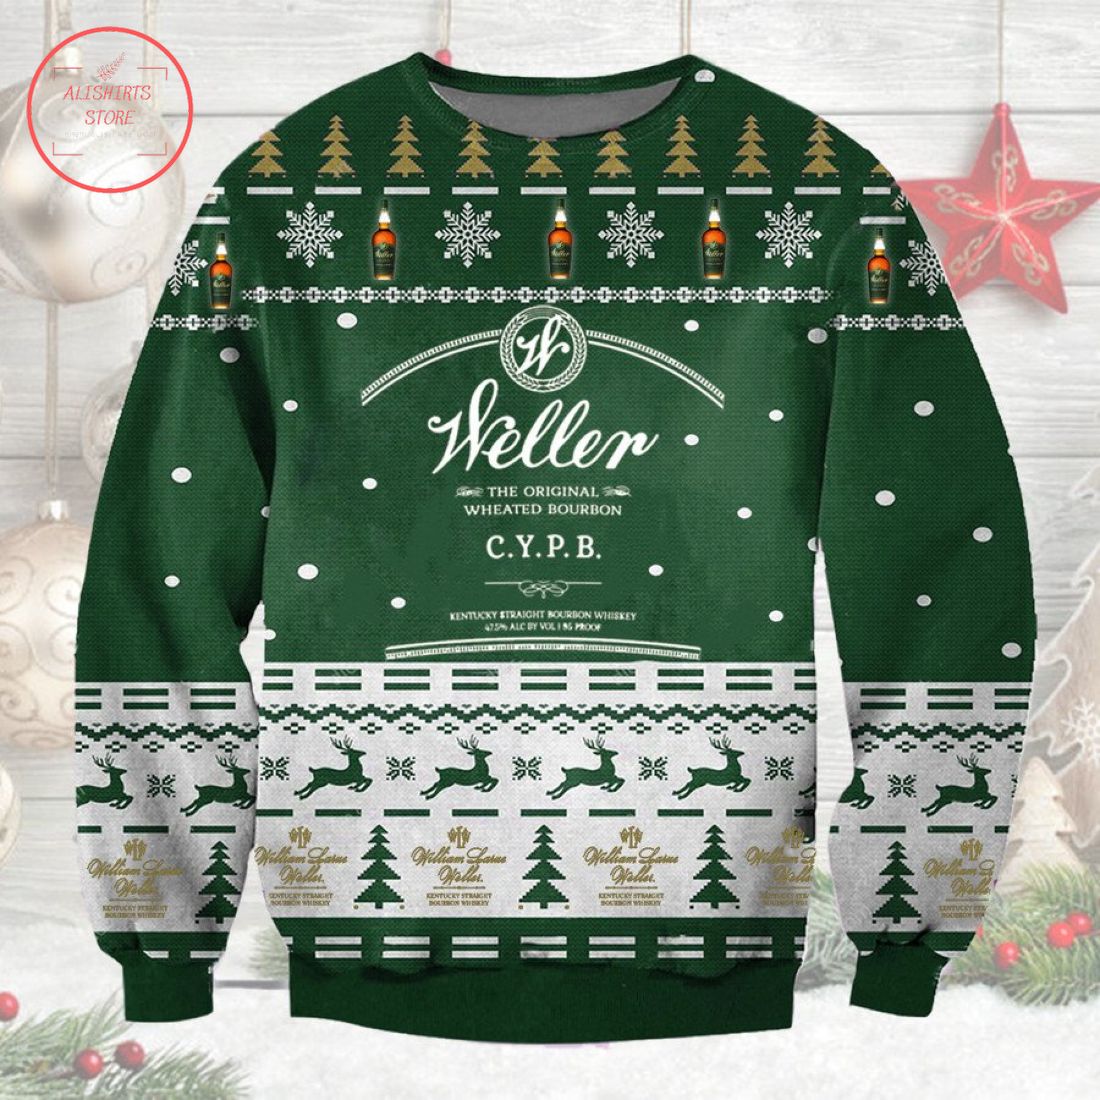 Weller Special Reserve Bourbon Ugly Christmas Sweater